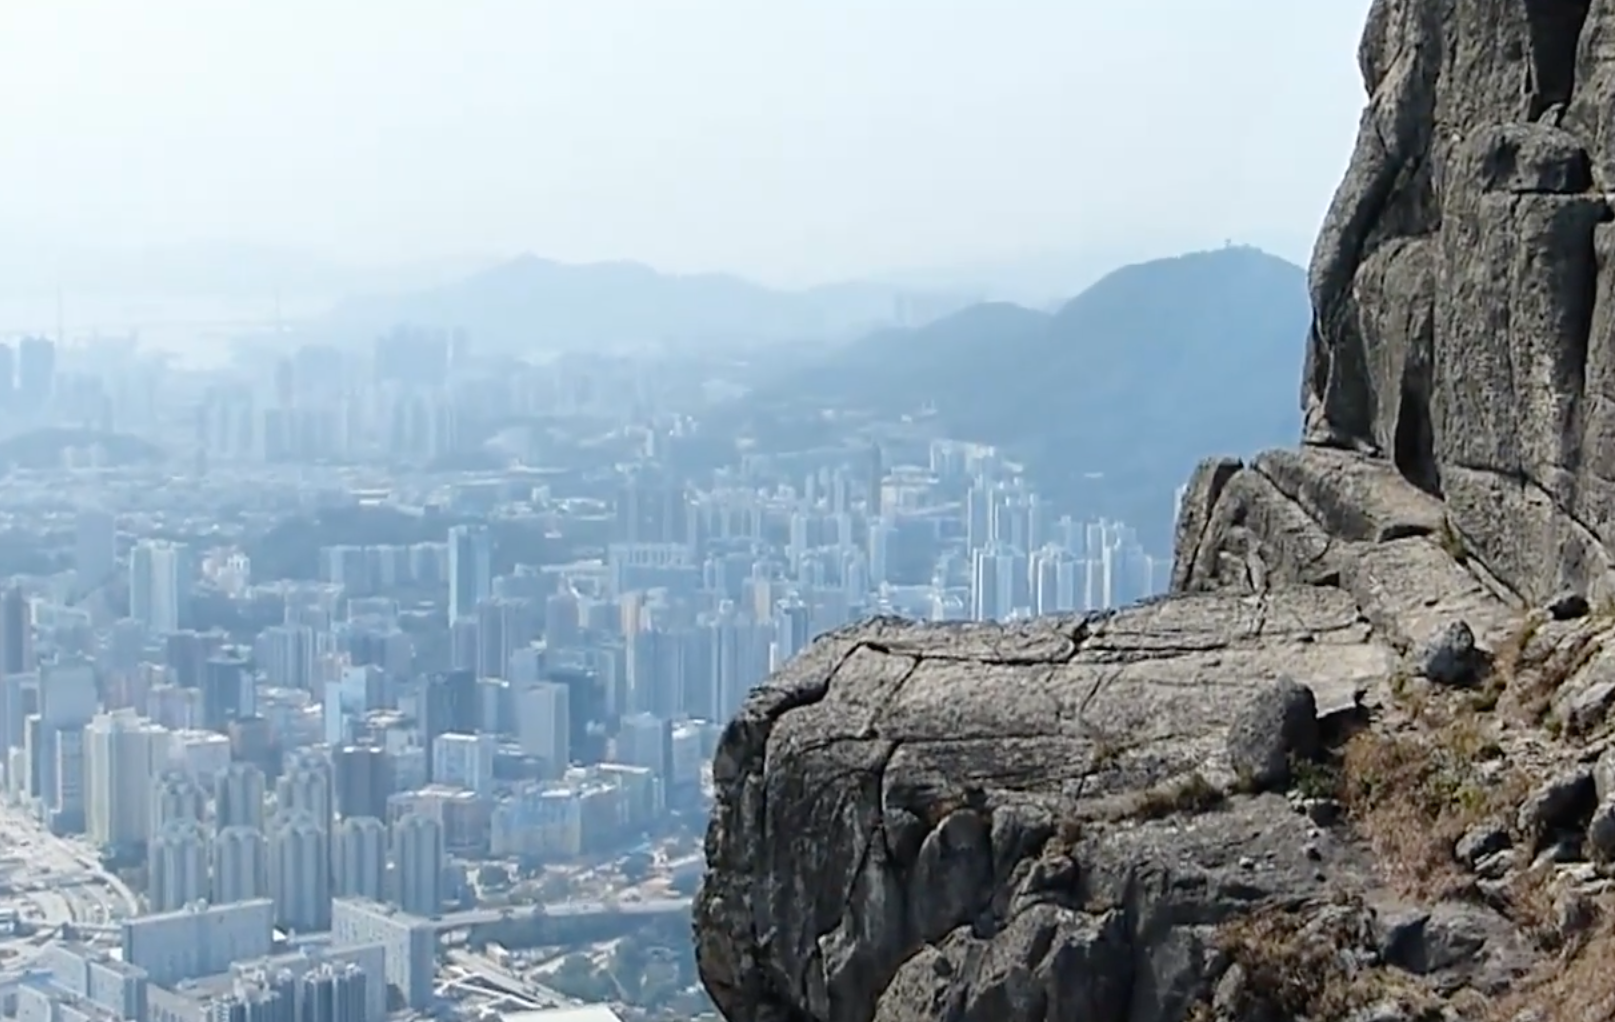 A view on Hong Kong from a cliff on Kowloon peak. Screengrab via YouTube/Moducking Jasso.